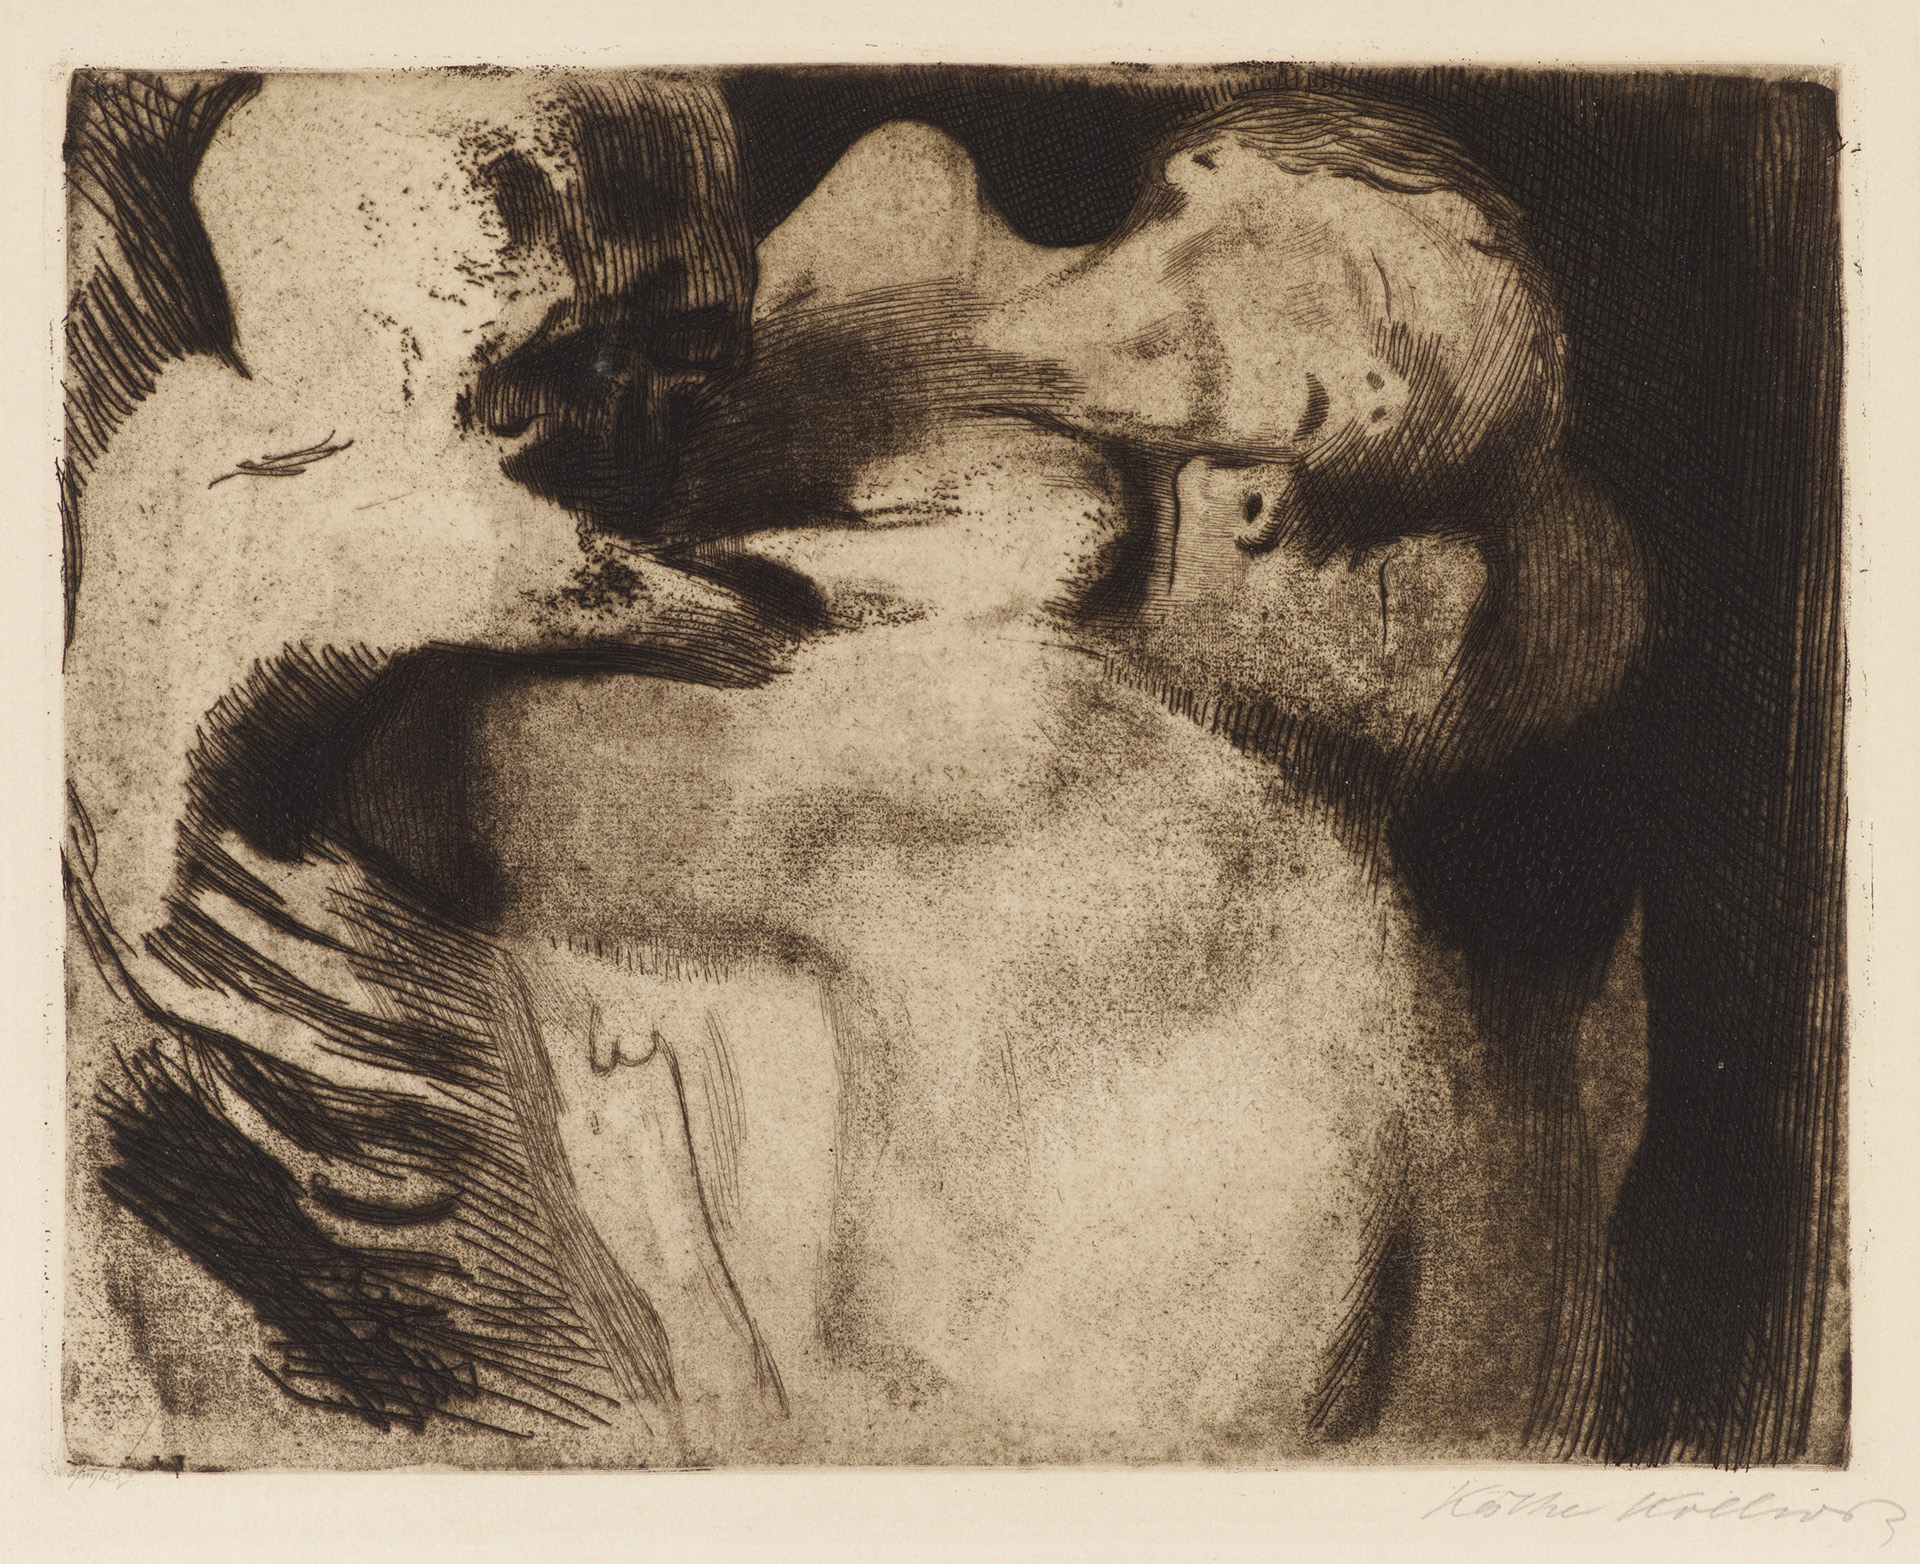 Käthe Kollwitz, Death and Woman wrestling over a Child, 1911, line etching, drypoint, sandpaper and vernis mou with imprint of laid paper, Kn 121 IX b, Cologne Kollwitz Collection © Käthe Kollwitz Museum Köln